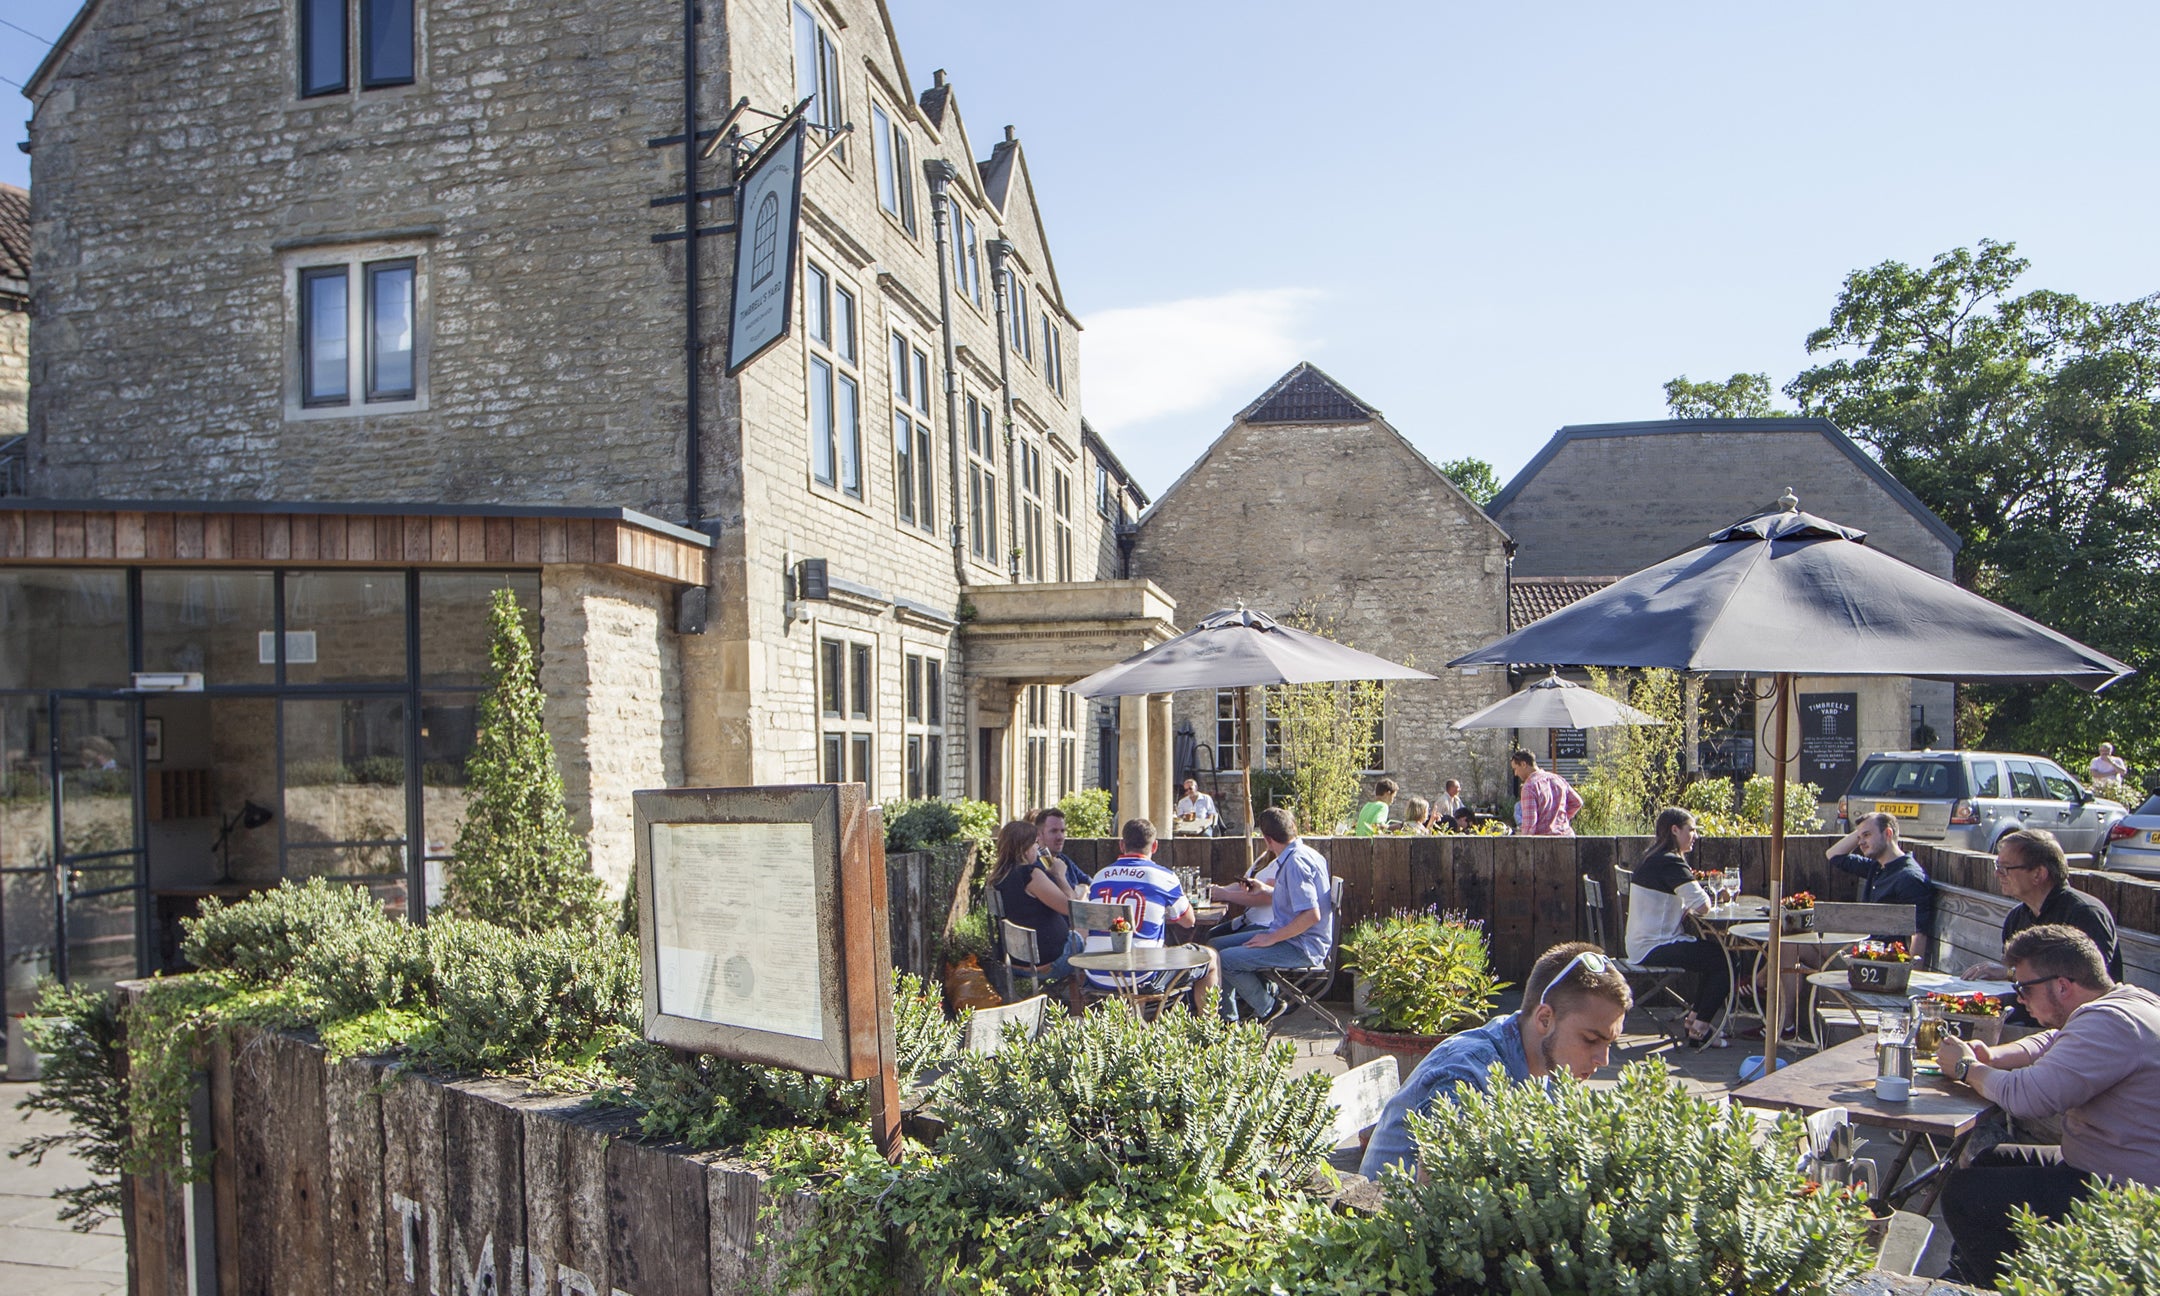 The Grade II-listed building has 17 rooms, plus a large, industrial-style restaurant